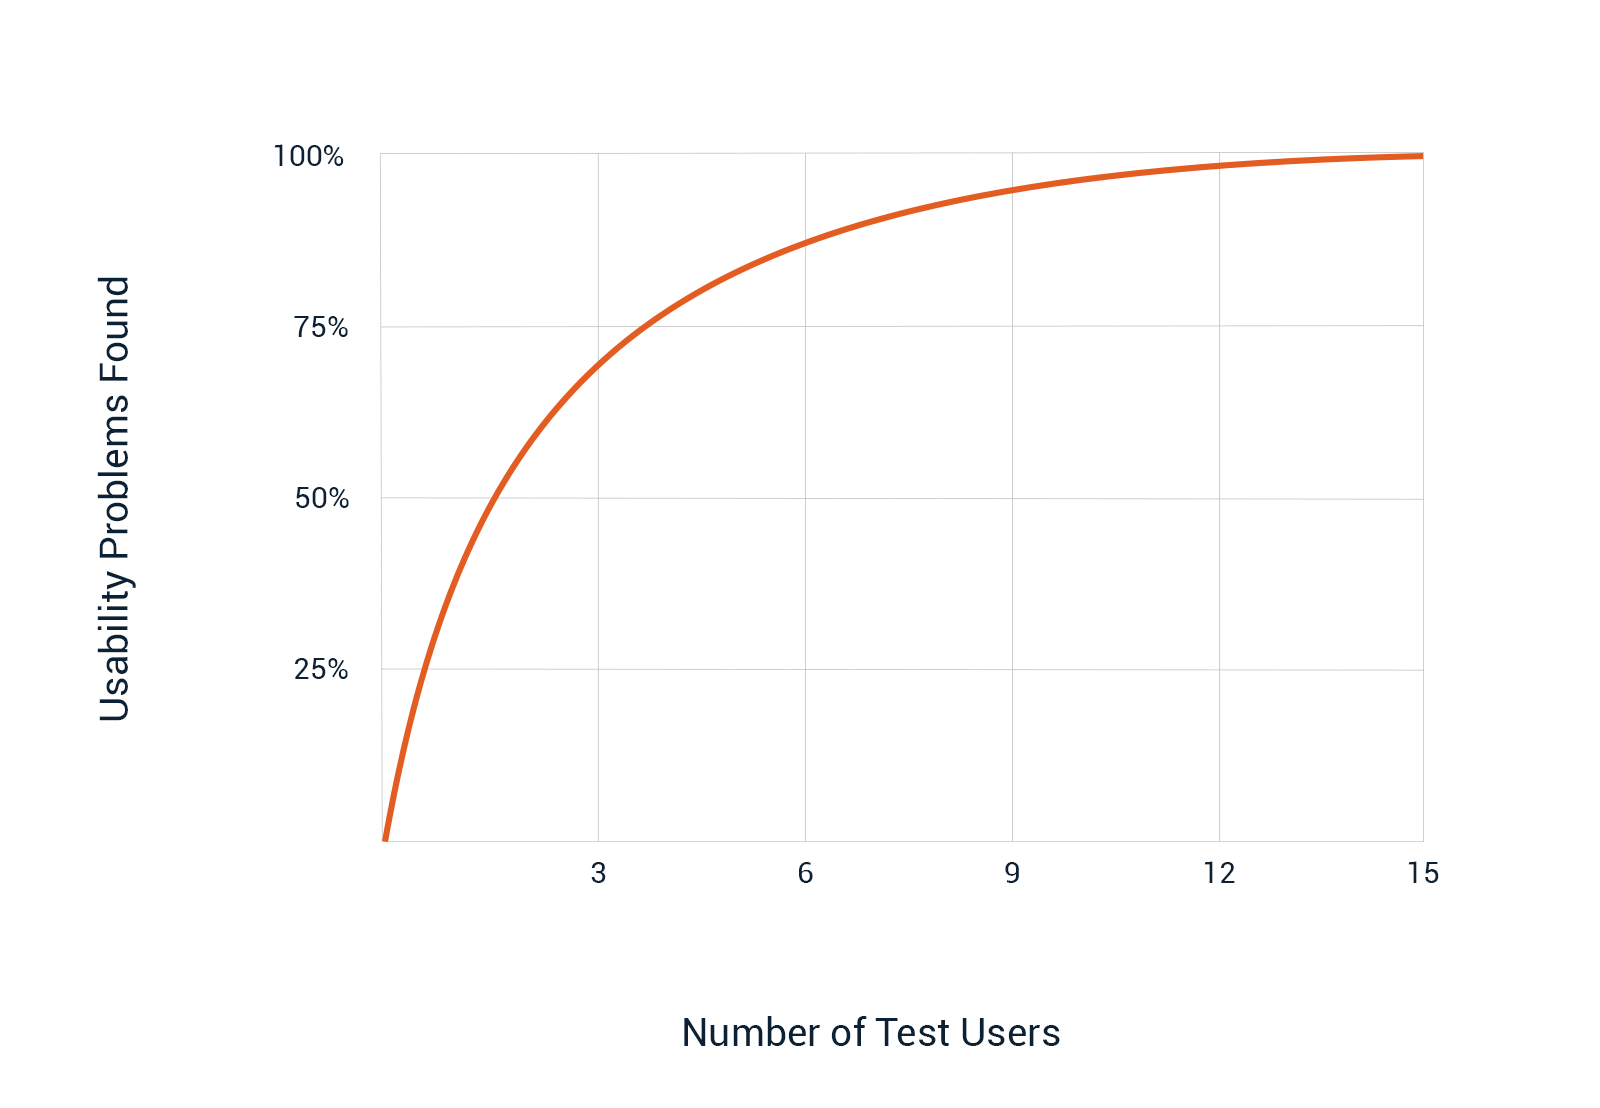 Number of test users vs. usability issues detected ratio